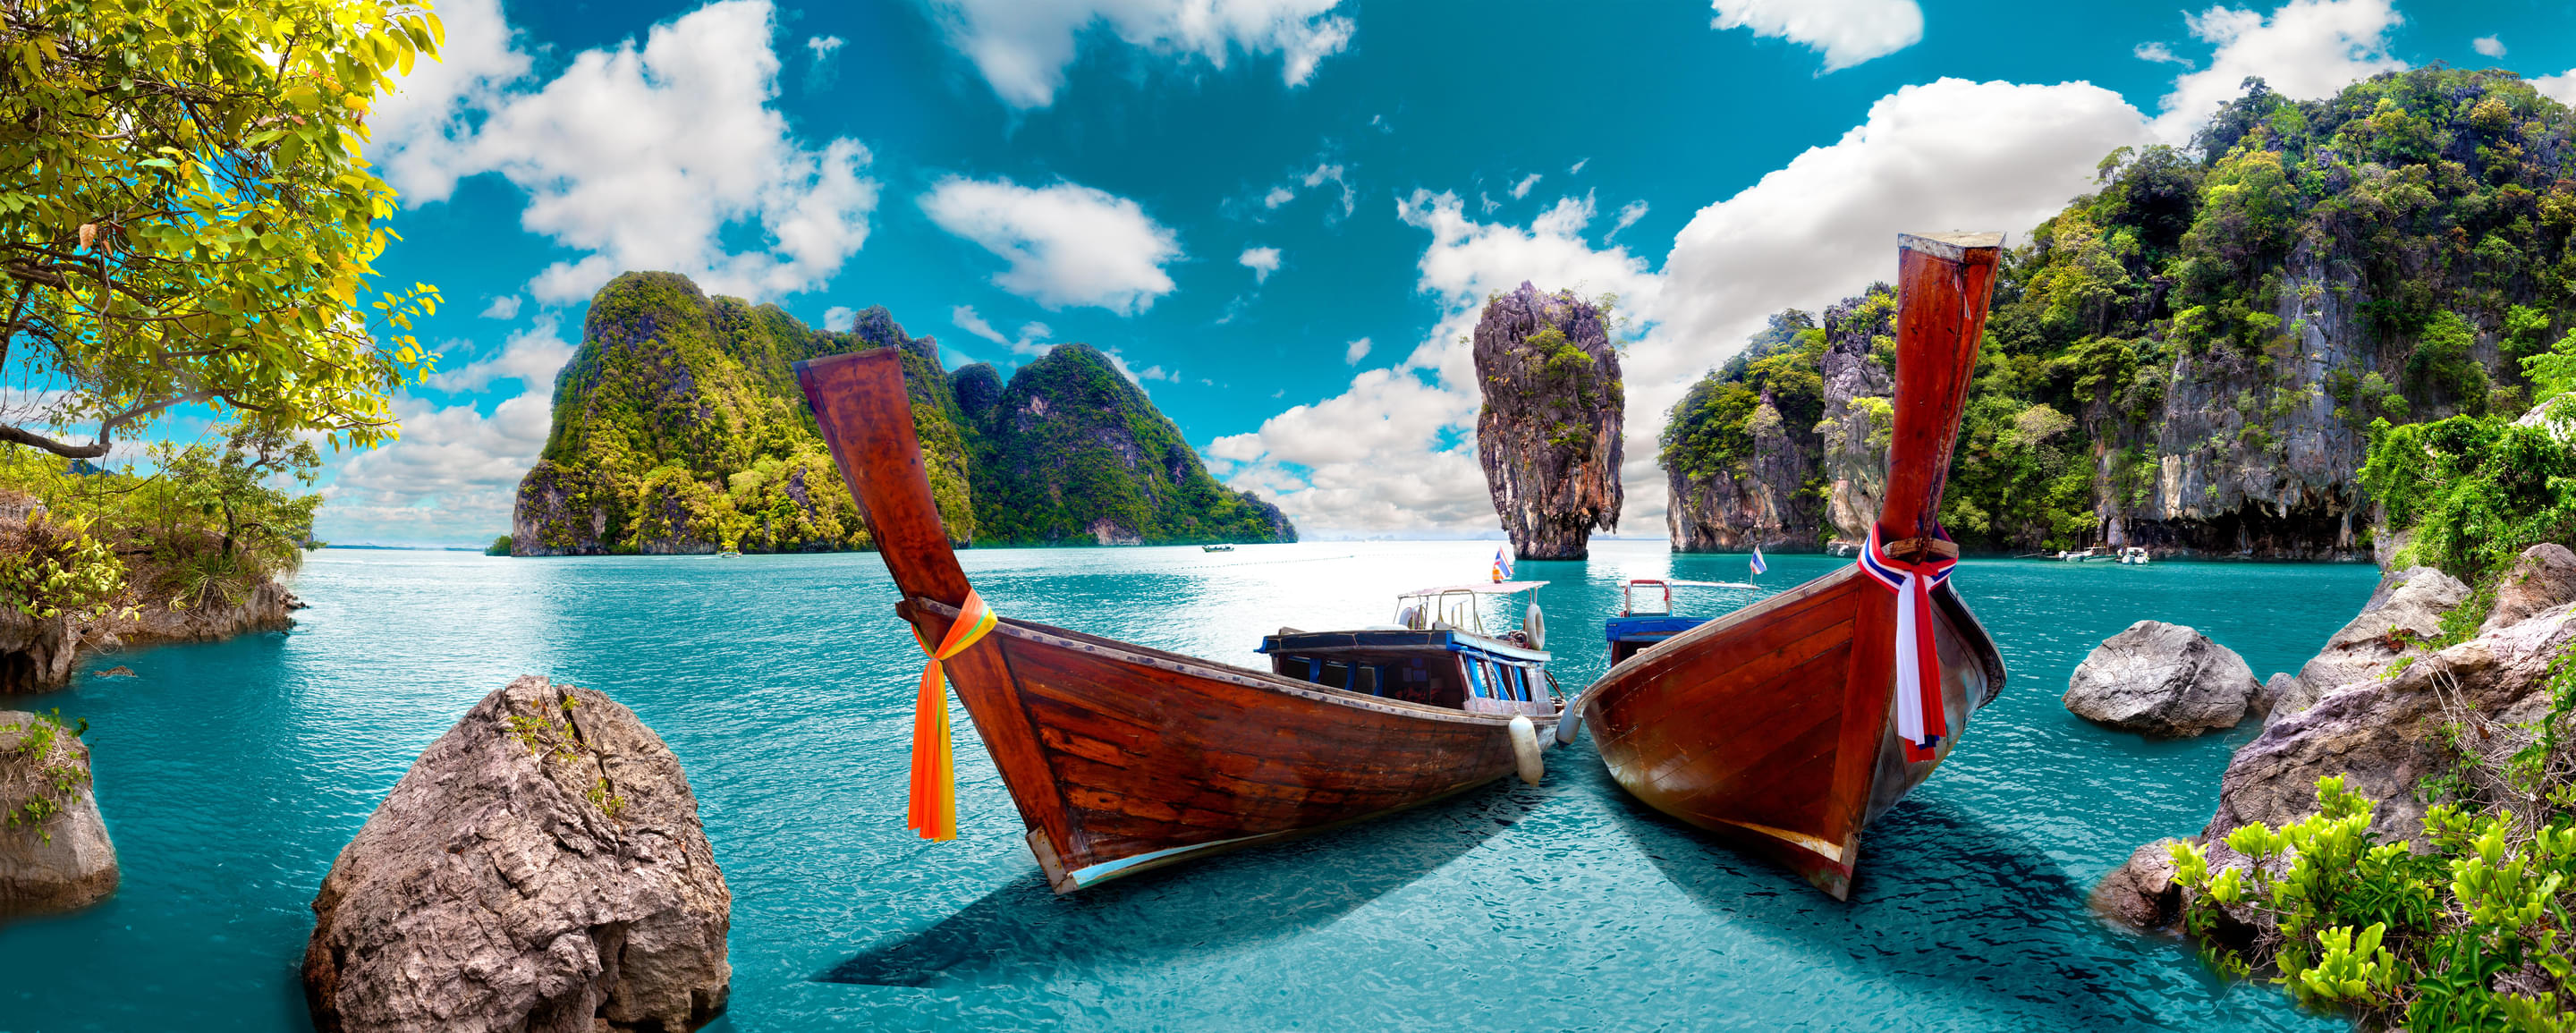 Popular Thailand Tour Packages With Flights | Upto 40% Off